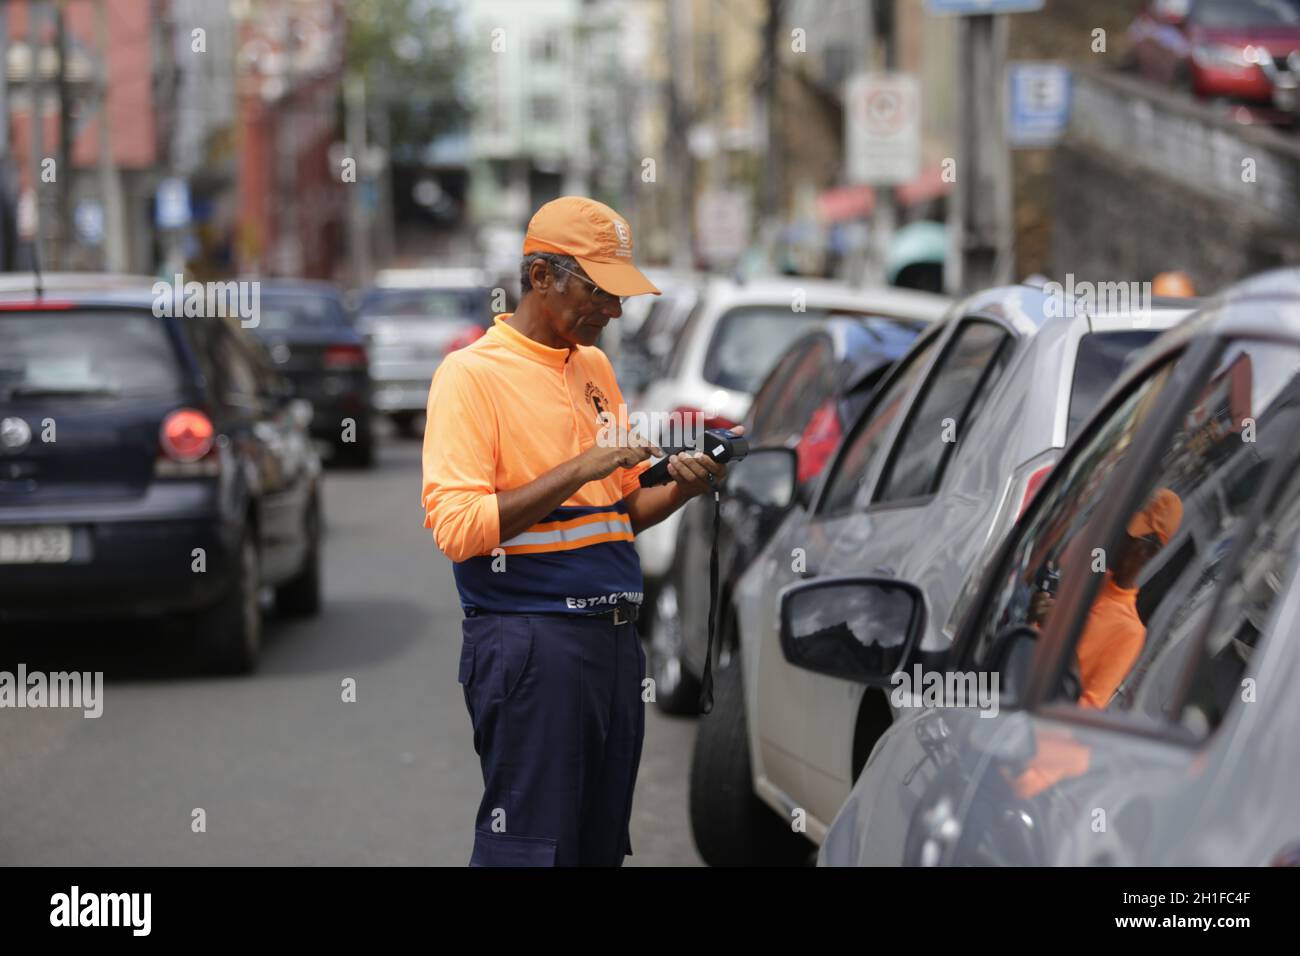 salvador, bahia / brazil - june 3, 2019: Blue Zone Operation Agent is seen charging driver parking fees in the city of Salvador. *** Local Caption *** Stock Photo